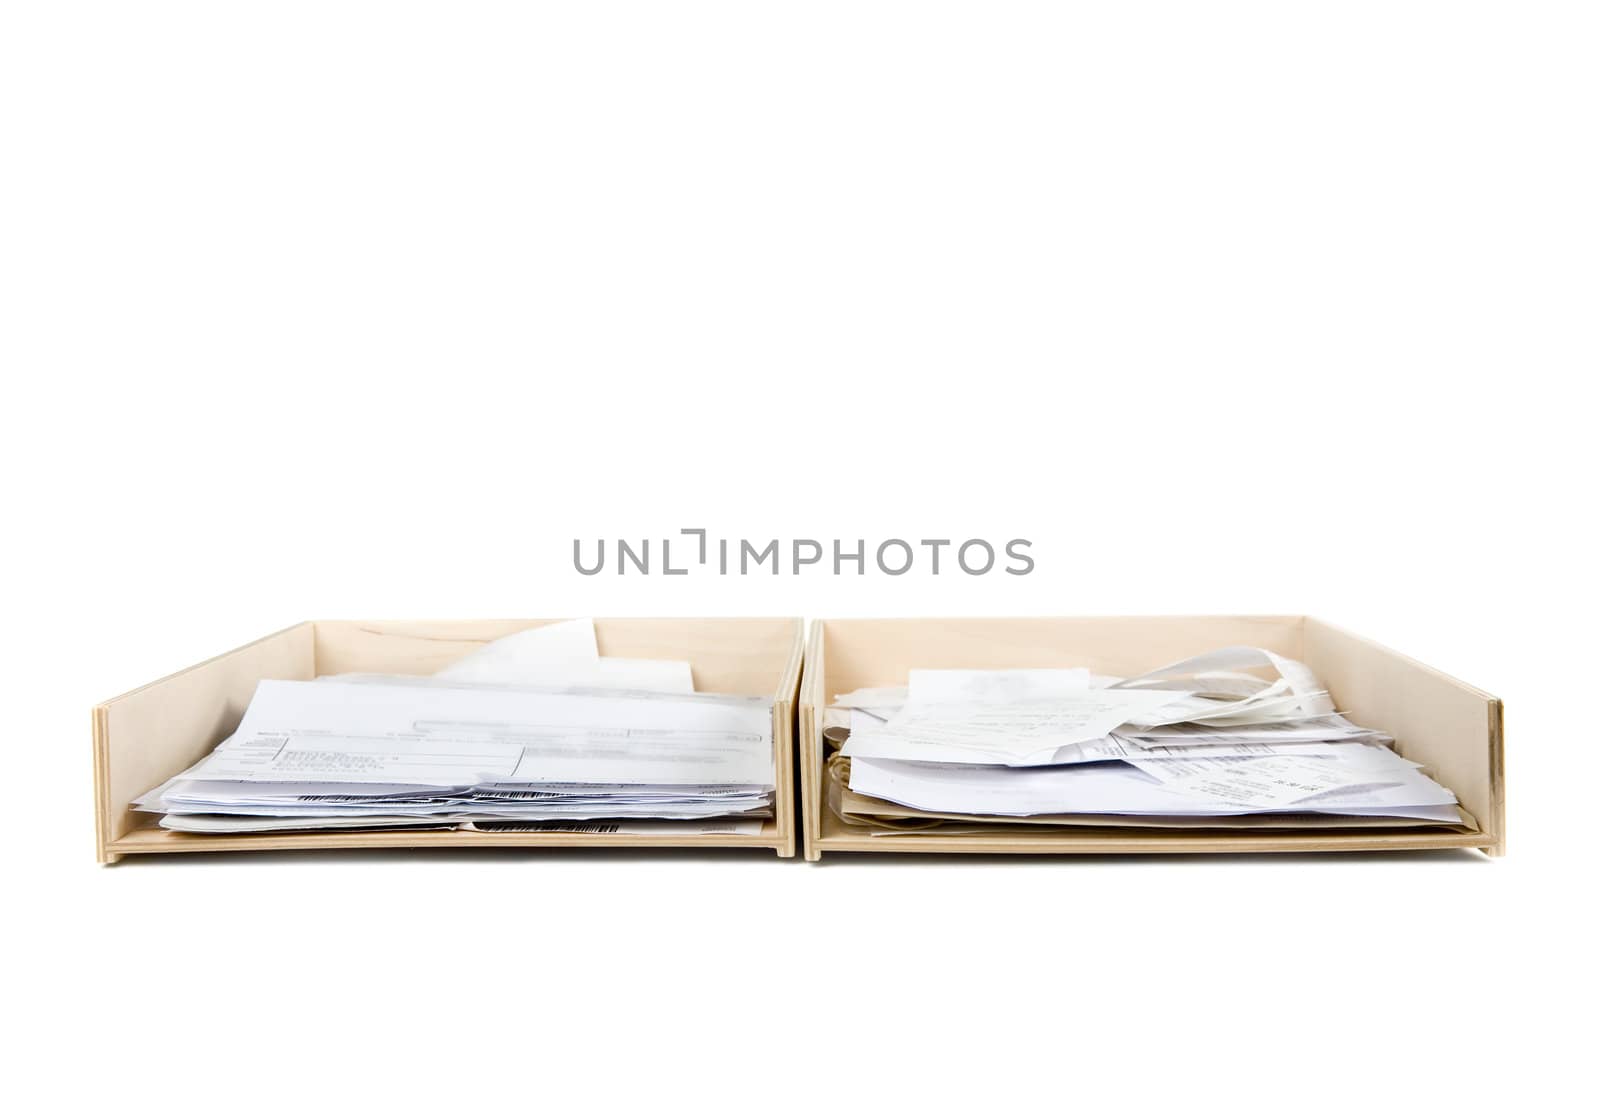 Wooden paper trays on a white background